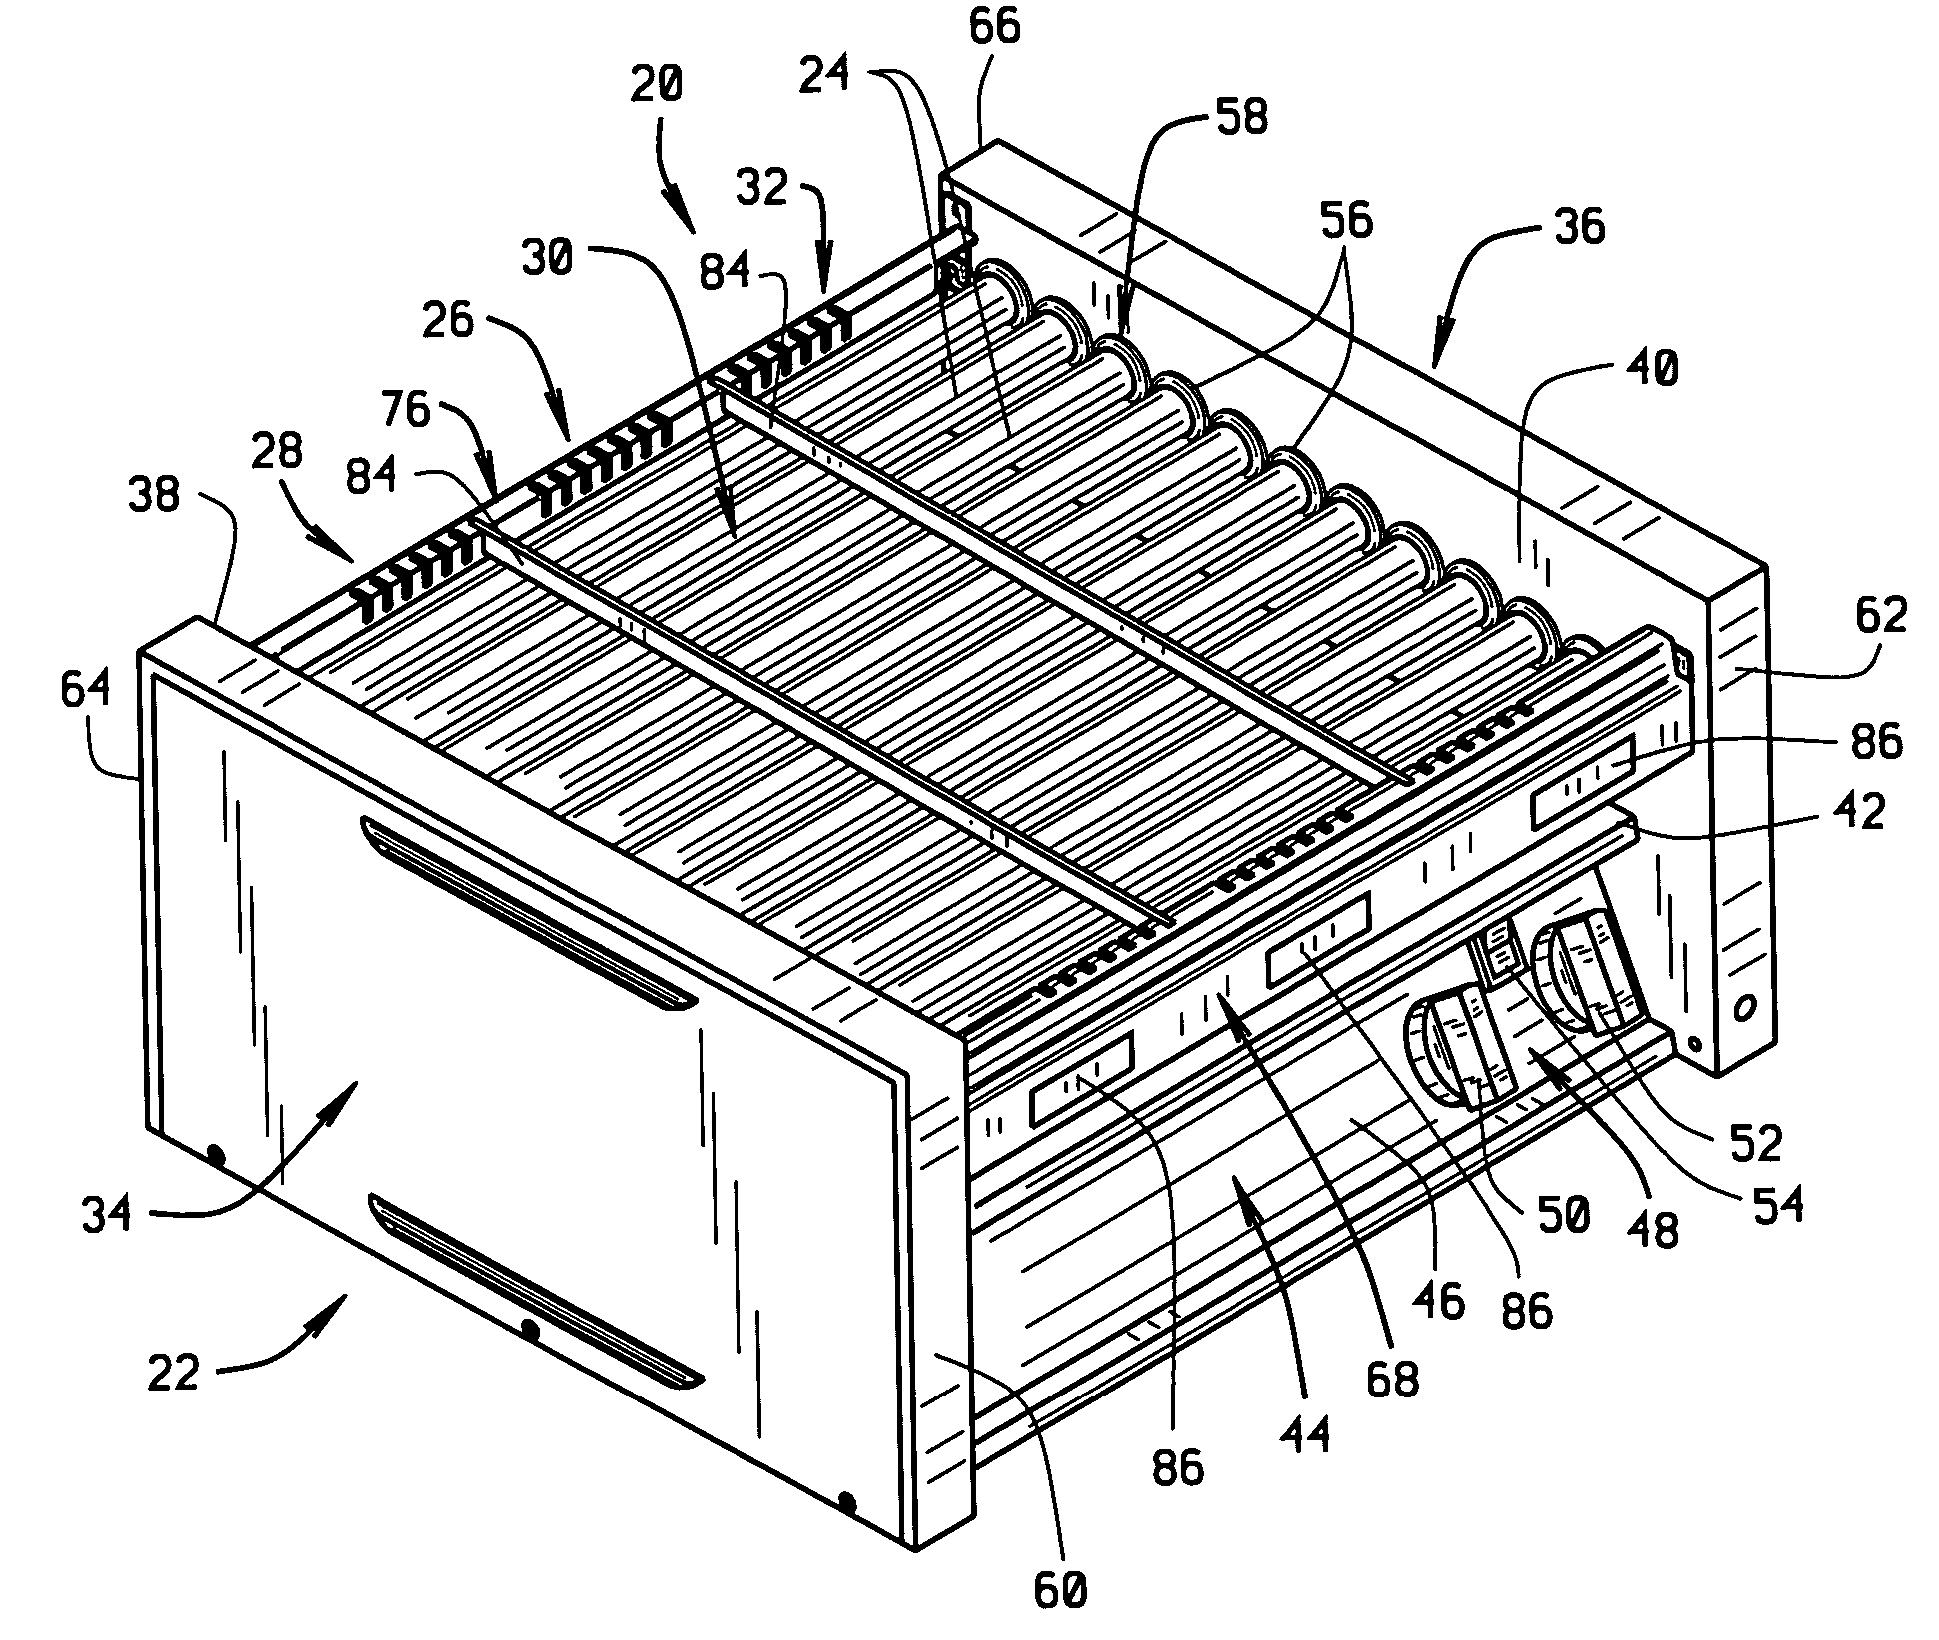 Section divider ensemble for roller grill for cooking human food